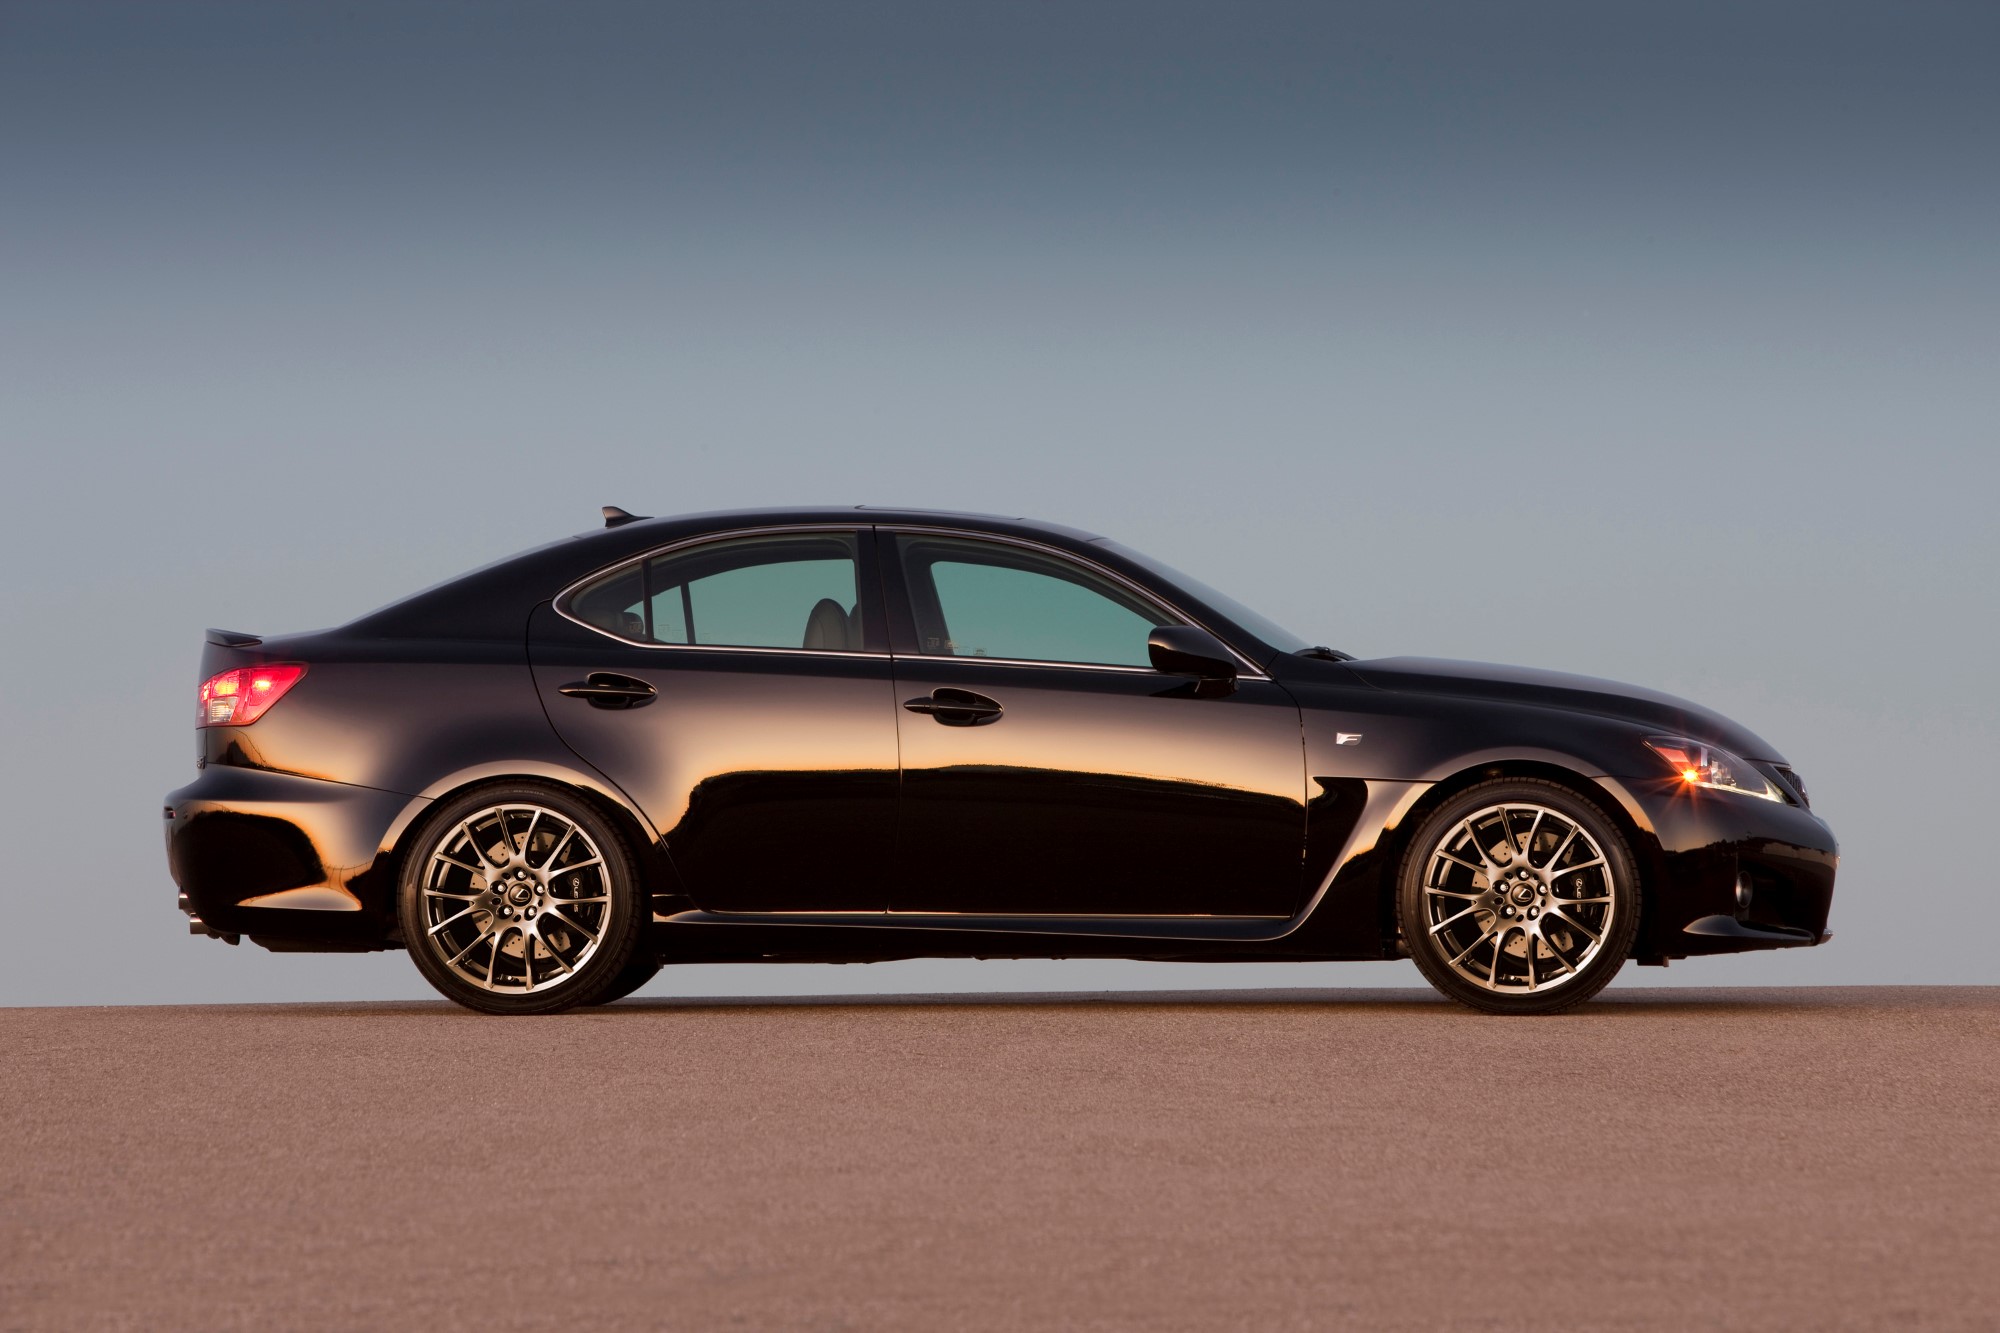 The New Lexus IS F Is The Old IS F, And The Last IS F, Ever